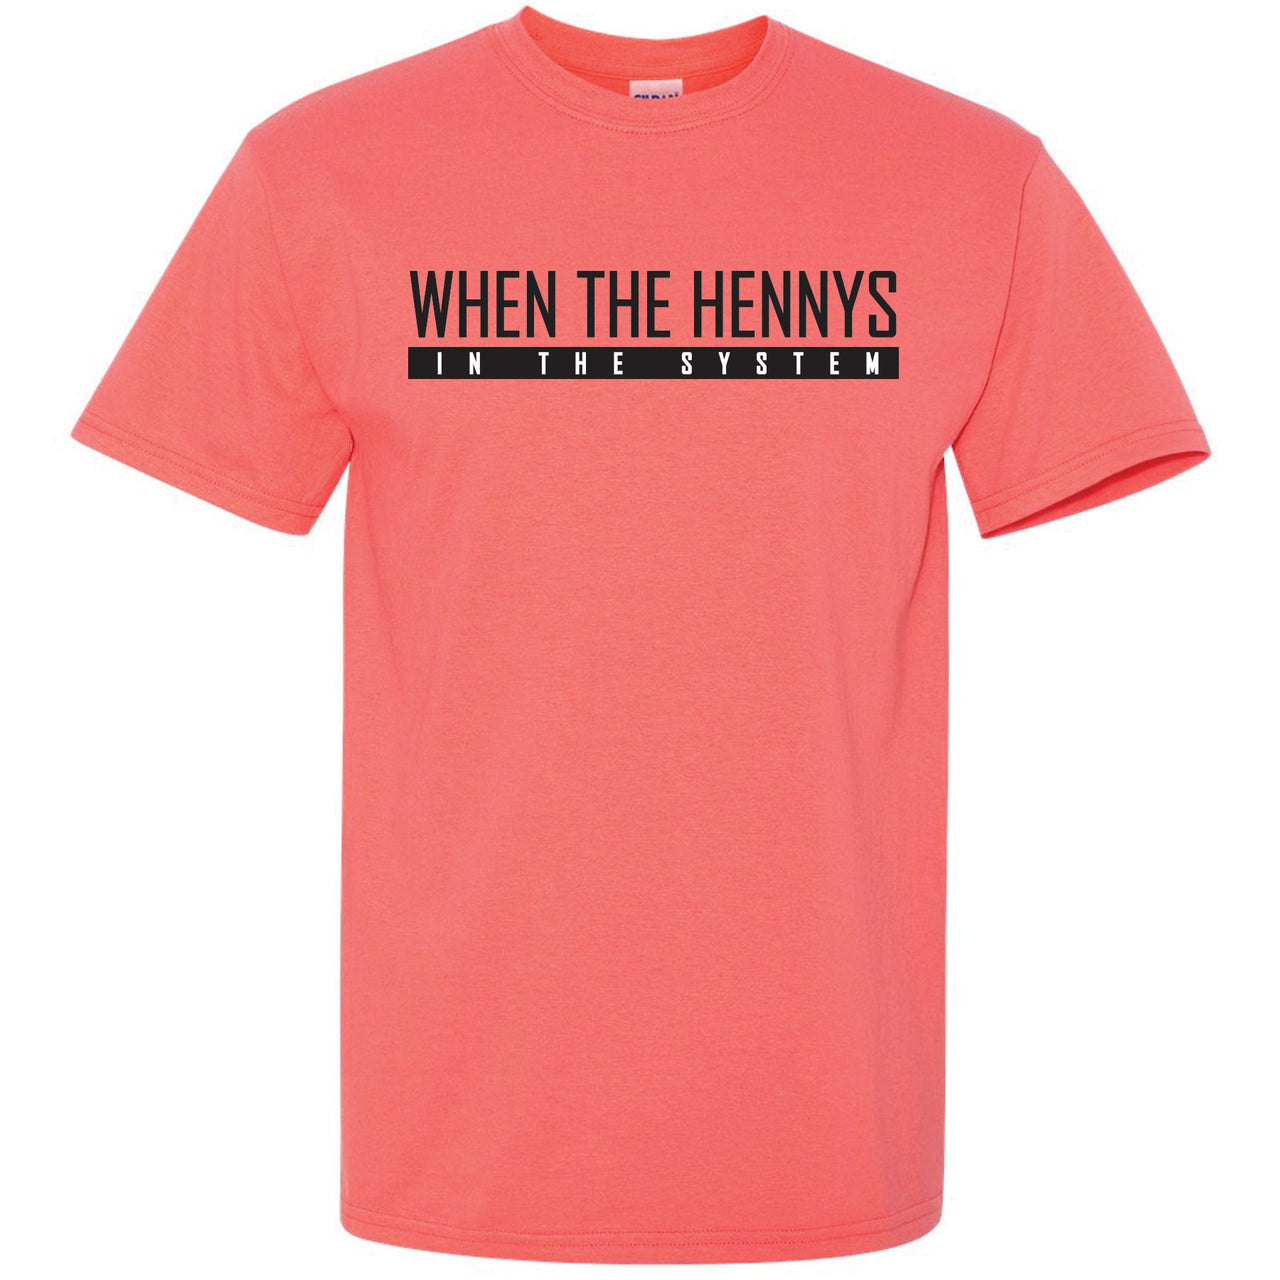 Infrared 6s T Shirt | When The Hennys In The System, Infrared